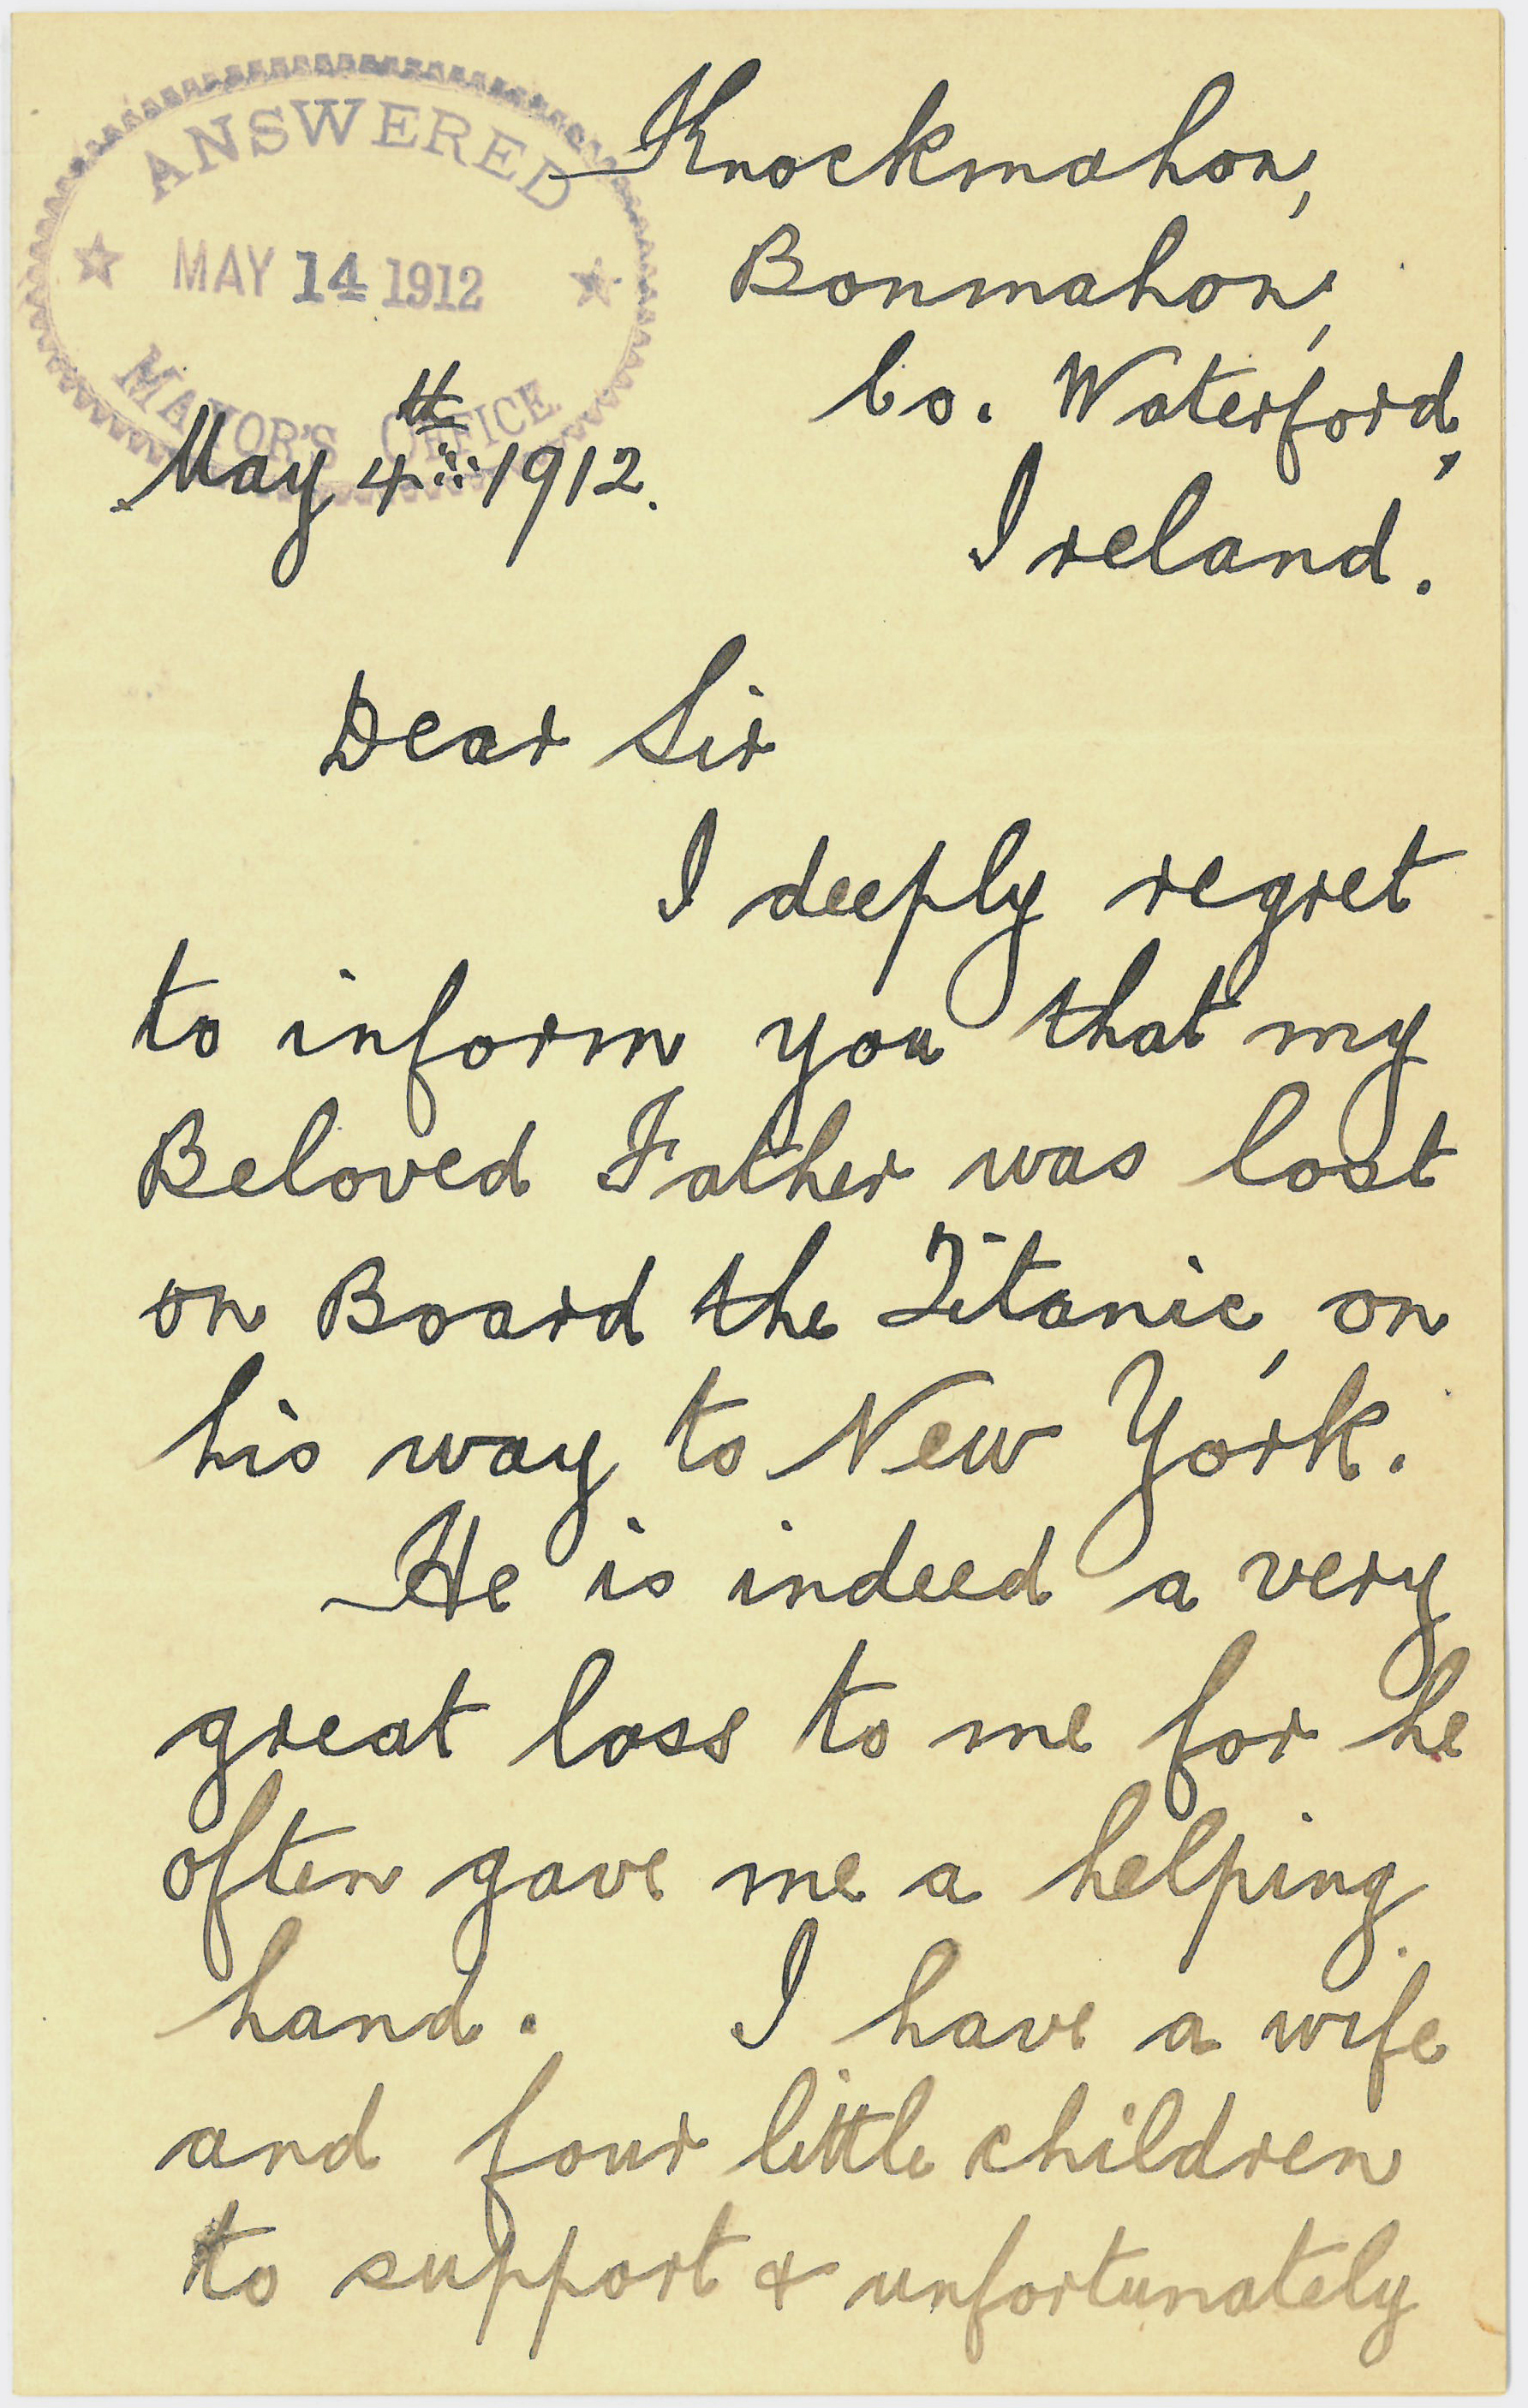 Letter asking for support from the Titanic relief fund, May 4, 1912. Mayor William J. Gaynor Subject Files-Titanic Disaster Relief fund-Aid Requests, roll 10, NYC Municipal Archives.